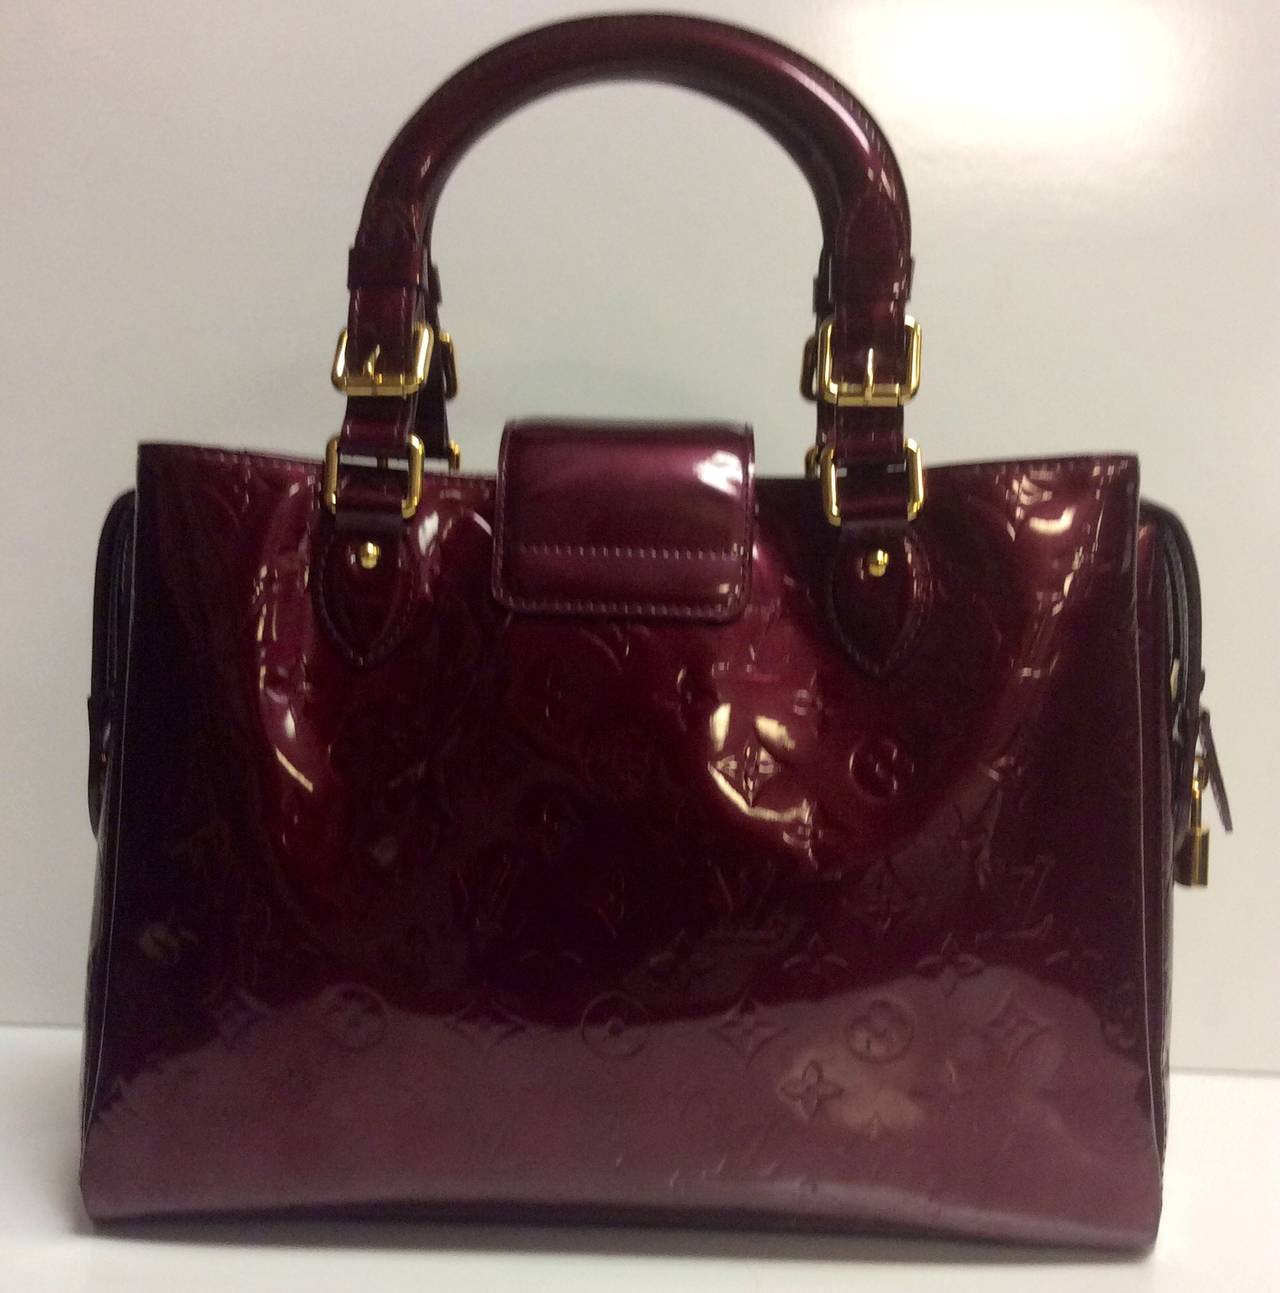 This is a Louis Vuitton Melrose Avenue handbag
The ideal companion for the stylish woman about town. Smart, efficient, versatile, and in beautiful glossy leather too. Very sophisticated.
14.2 x 9.8 x 4.3 inches 
(Length x Height x Width) 
-